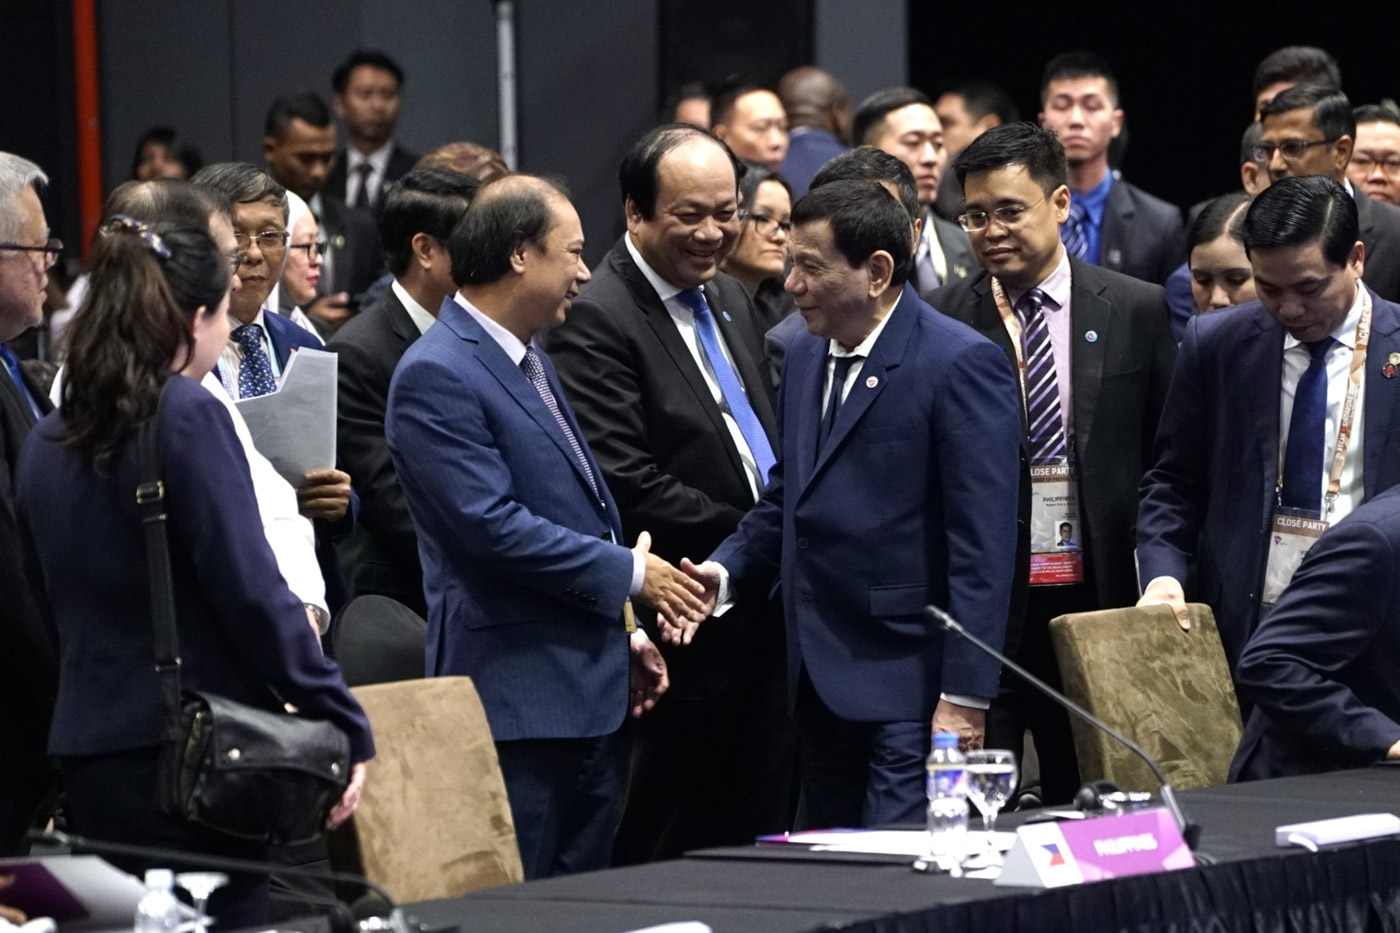 2019 ASEAN SUMMIT. Southeast Asian leaders are set to discuss trade, among other issues, at the 2019 ASEAN Summit. File photo shows President Rodrigo Duterte at the 6th ASEAN-US Summit in November 2018. Photo courtesy of Malacañang 